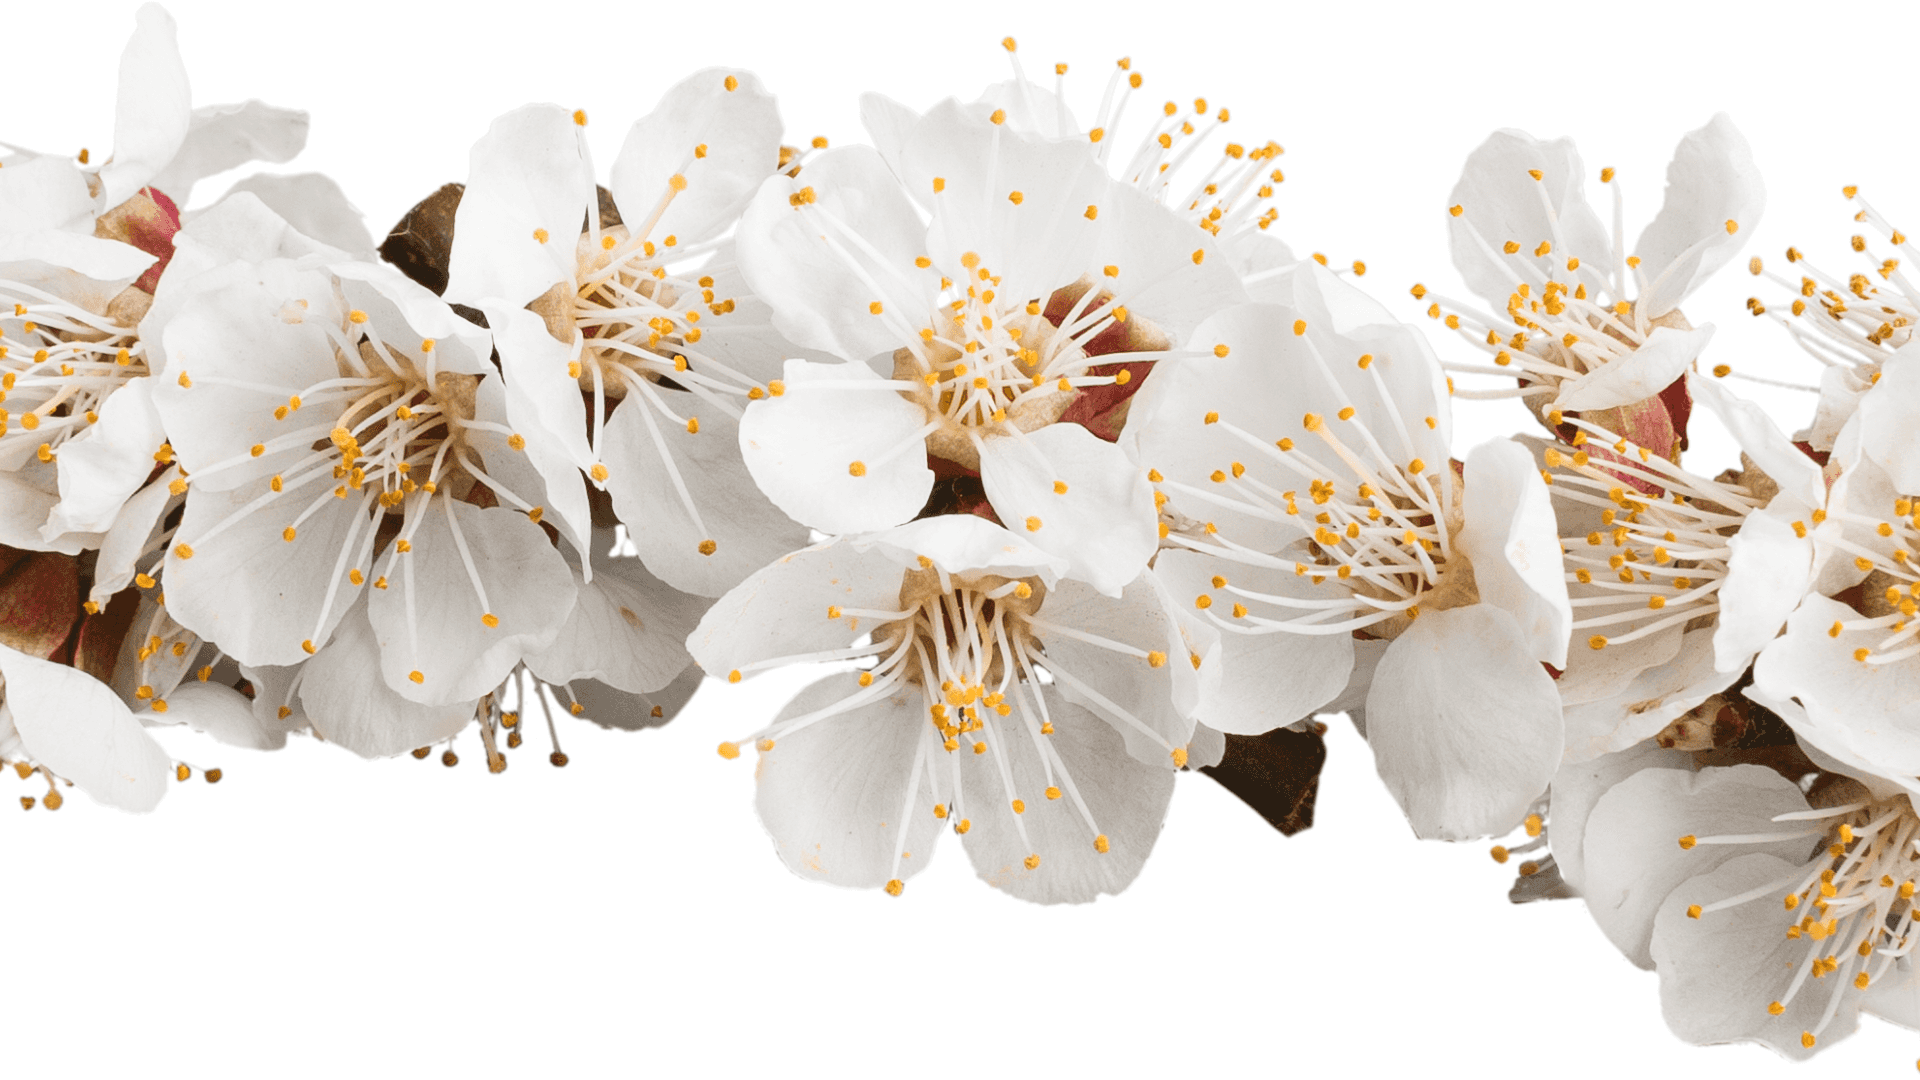 A White Flower With Yellow Petals On A White Background